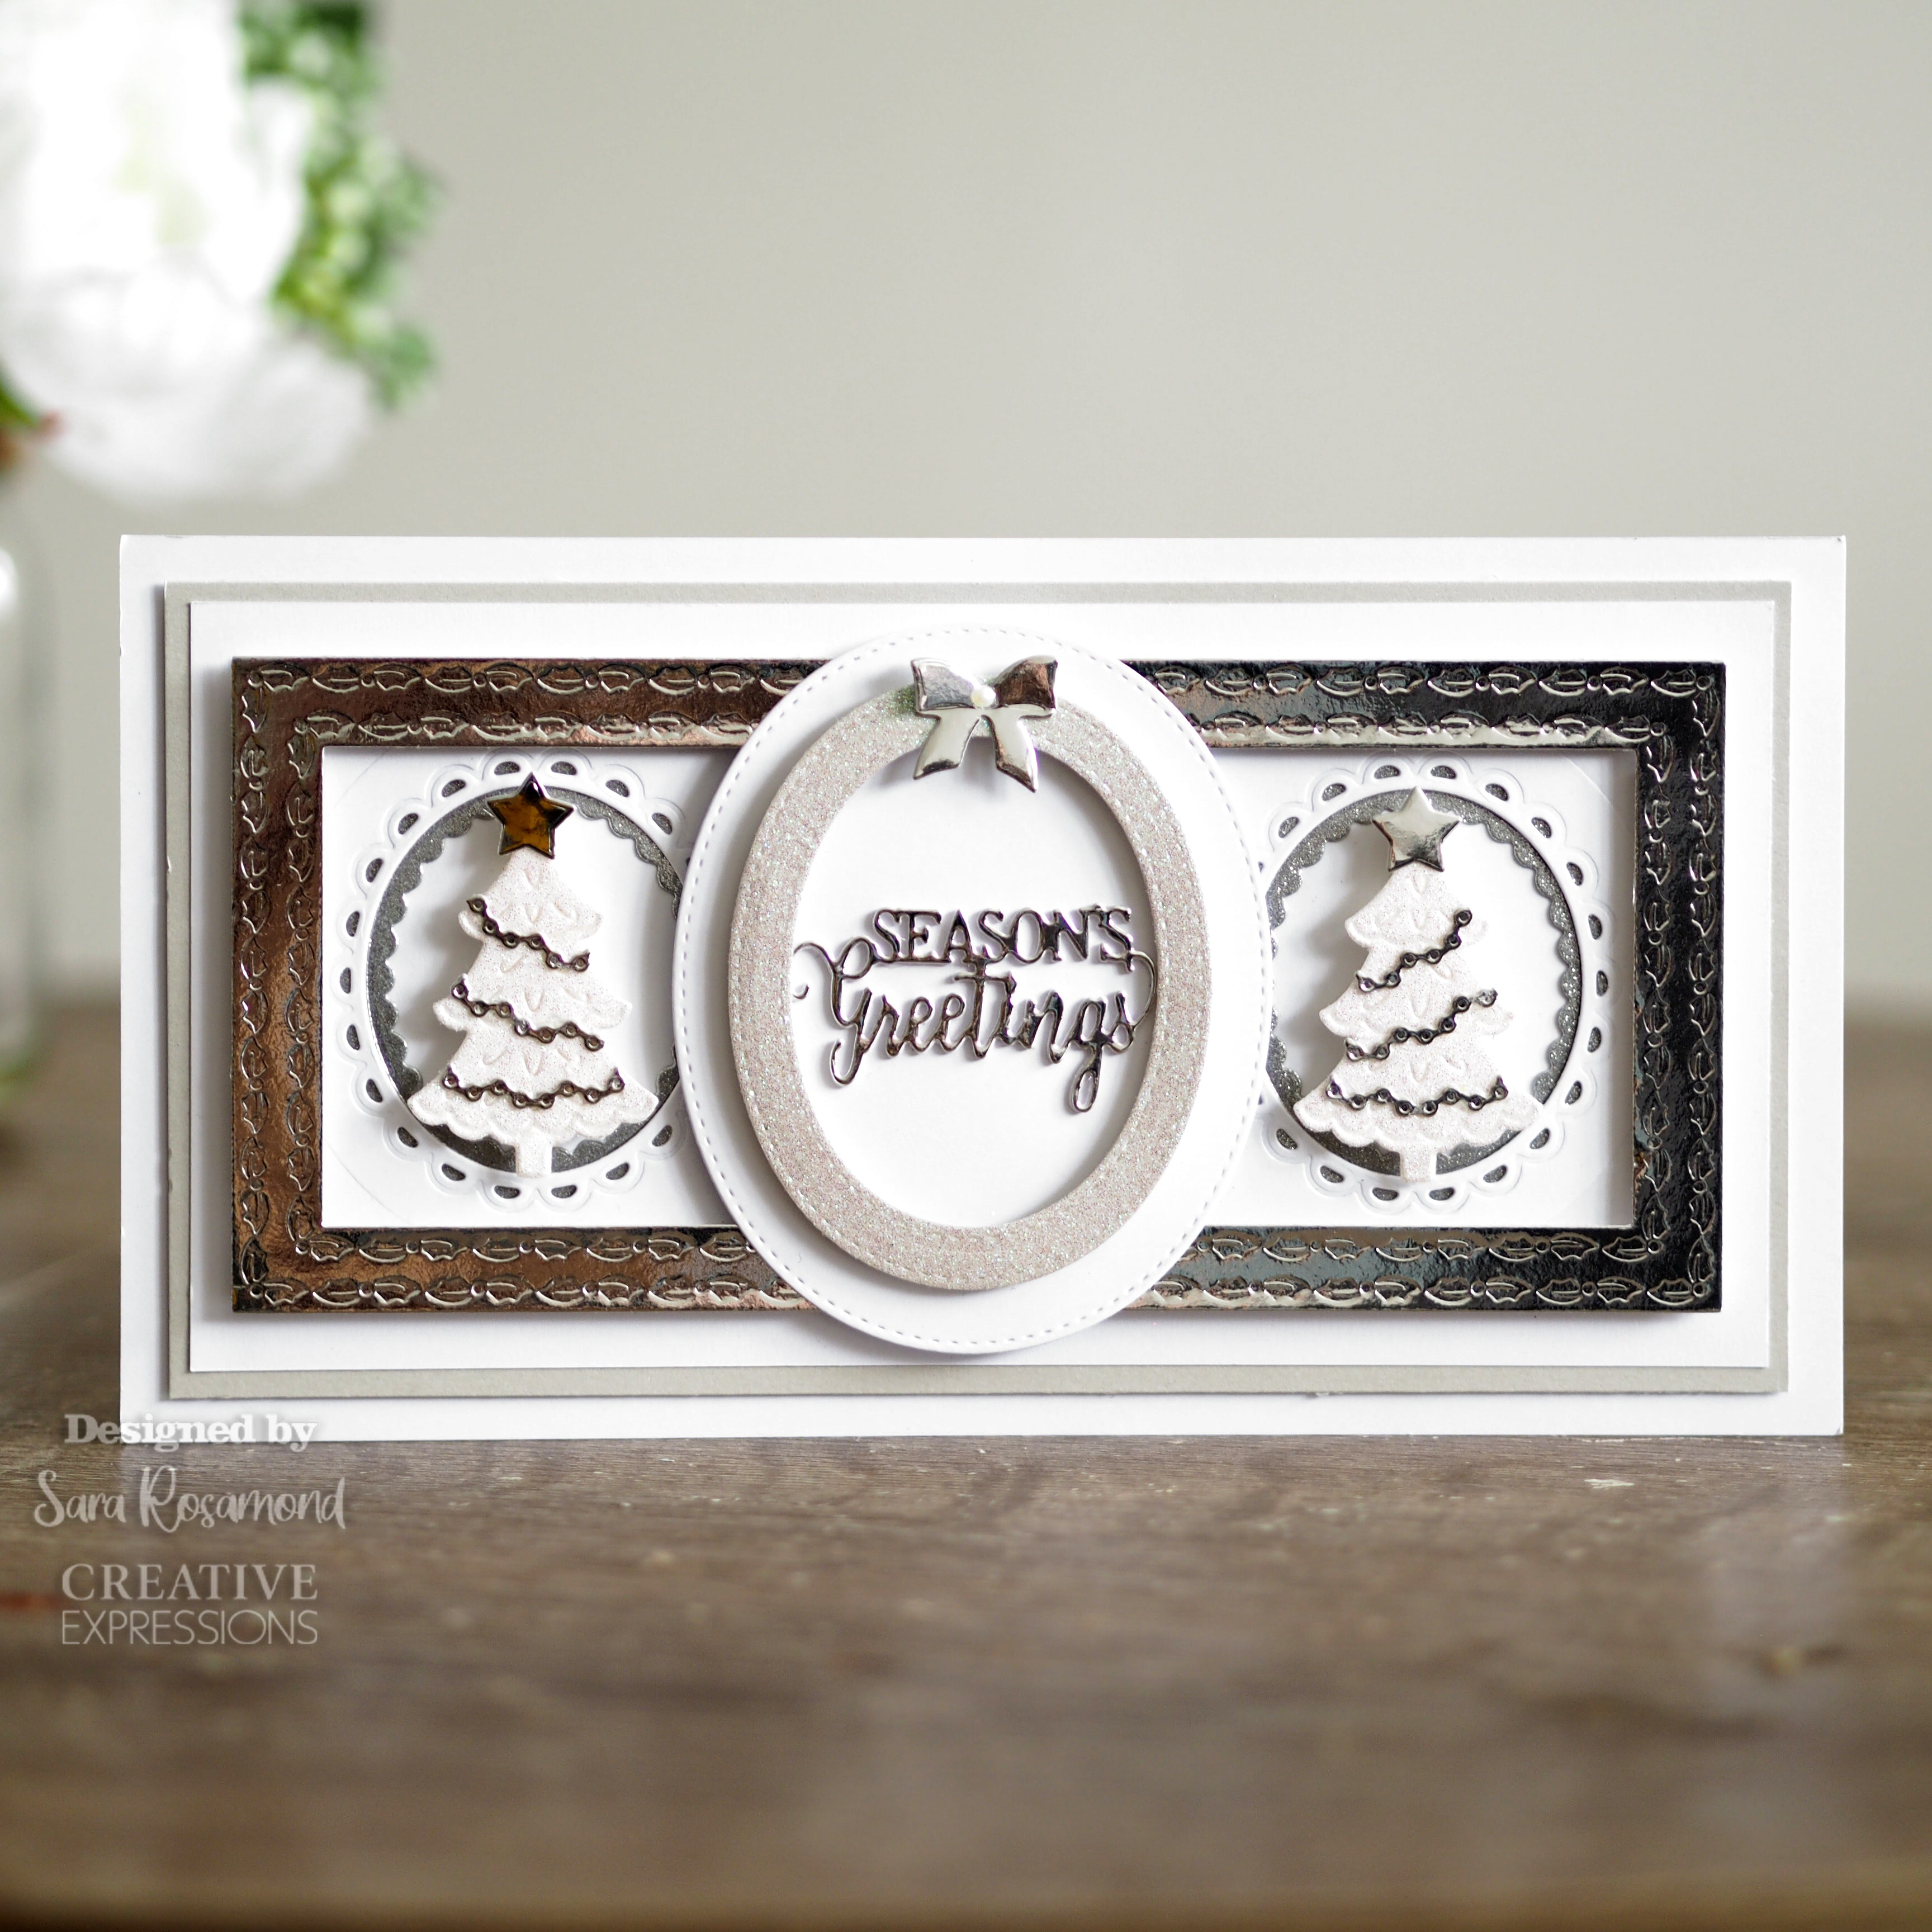 Creative Expressions Sue Wilson Mini Expressions Seasons Greetings Craft Die